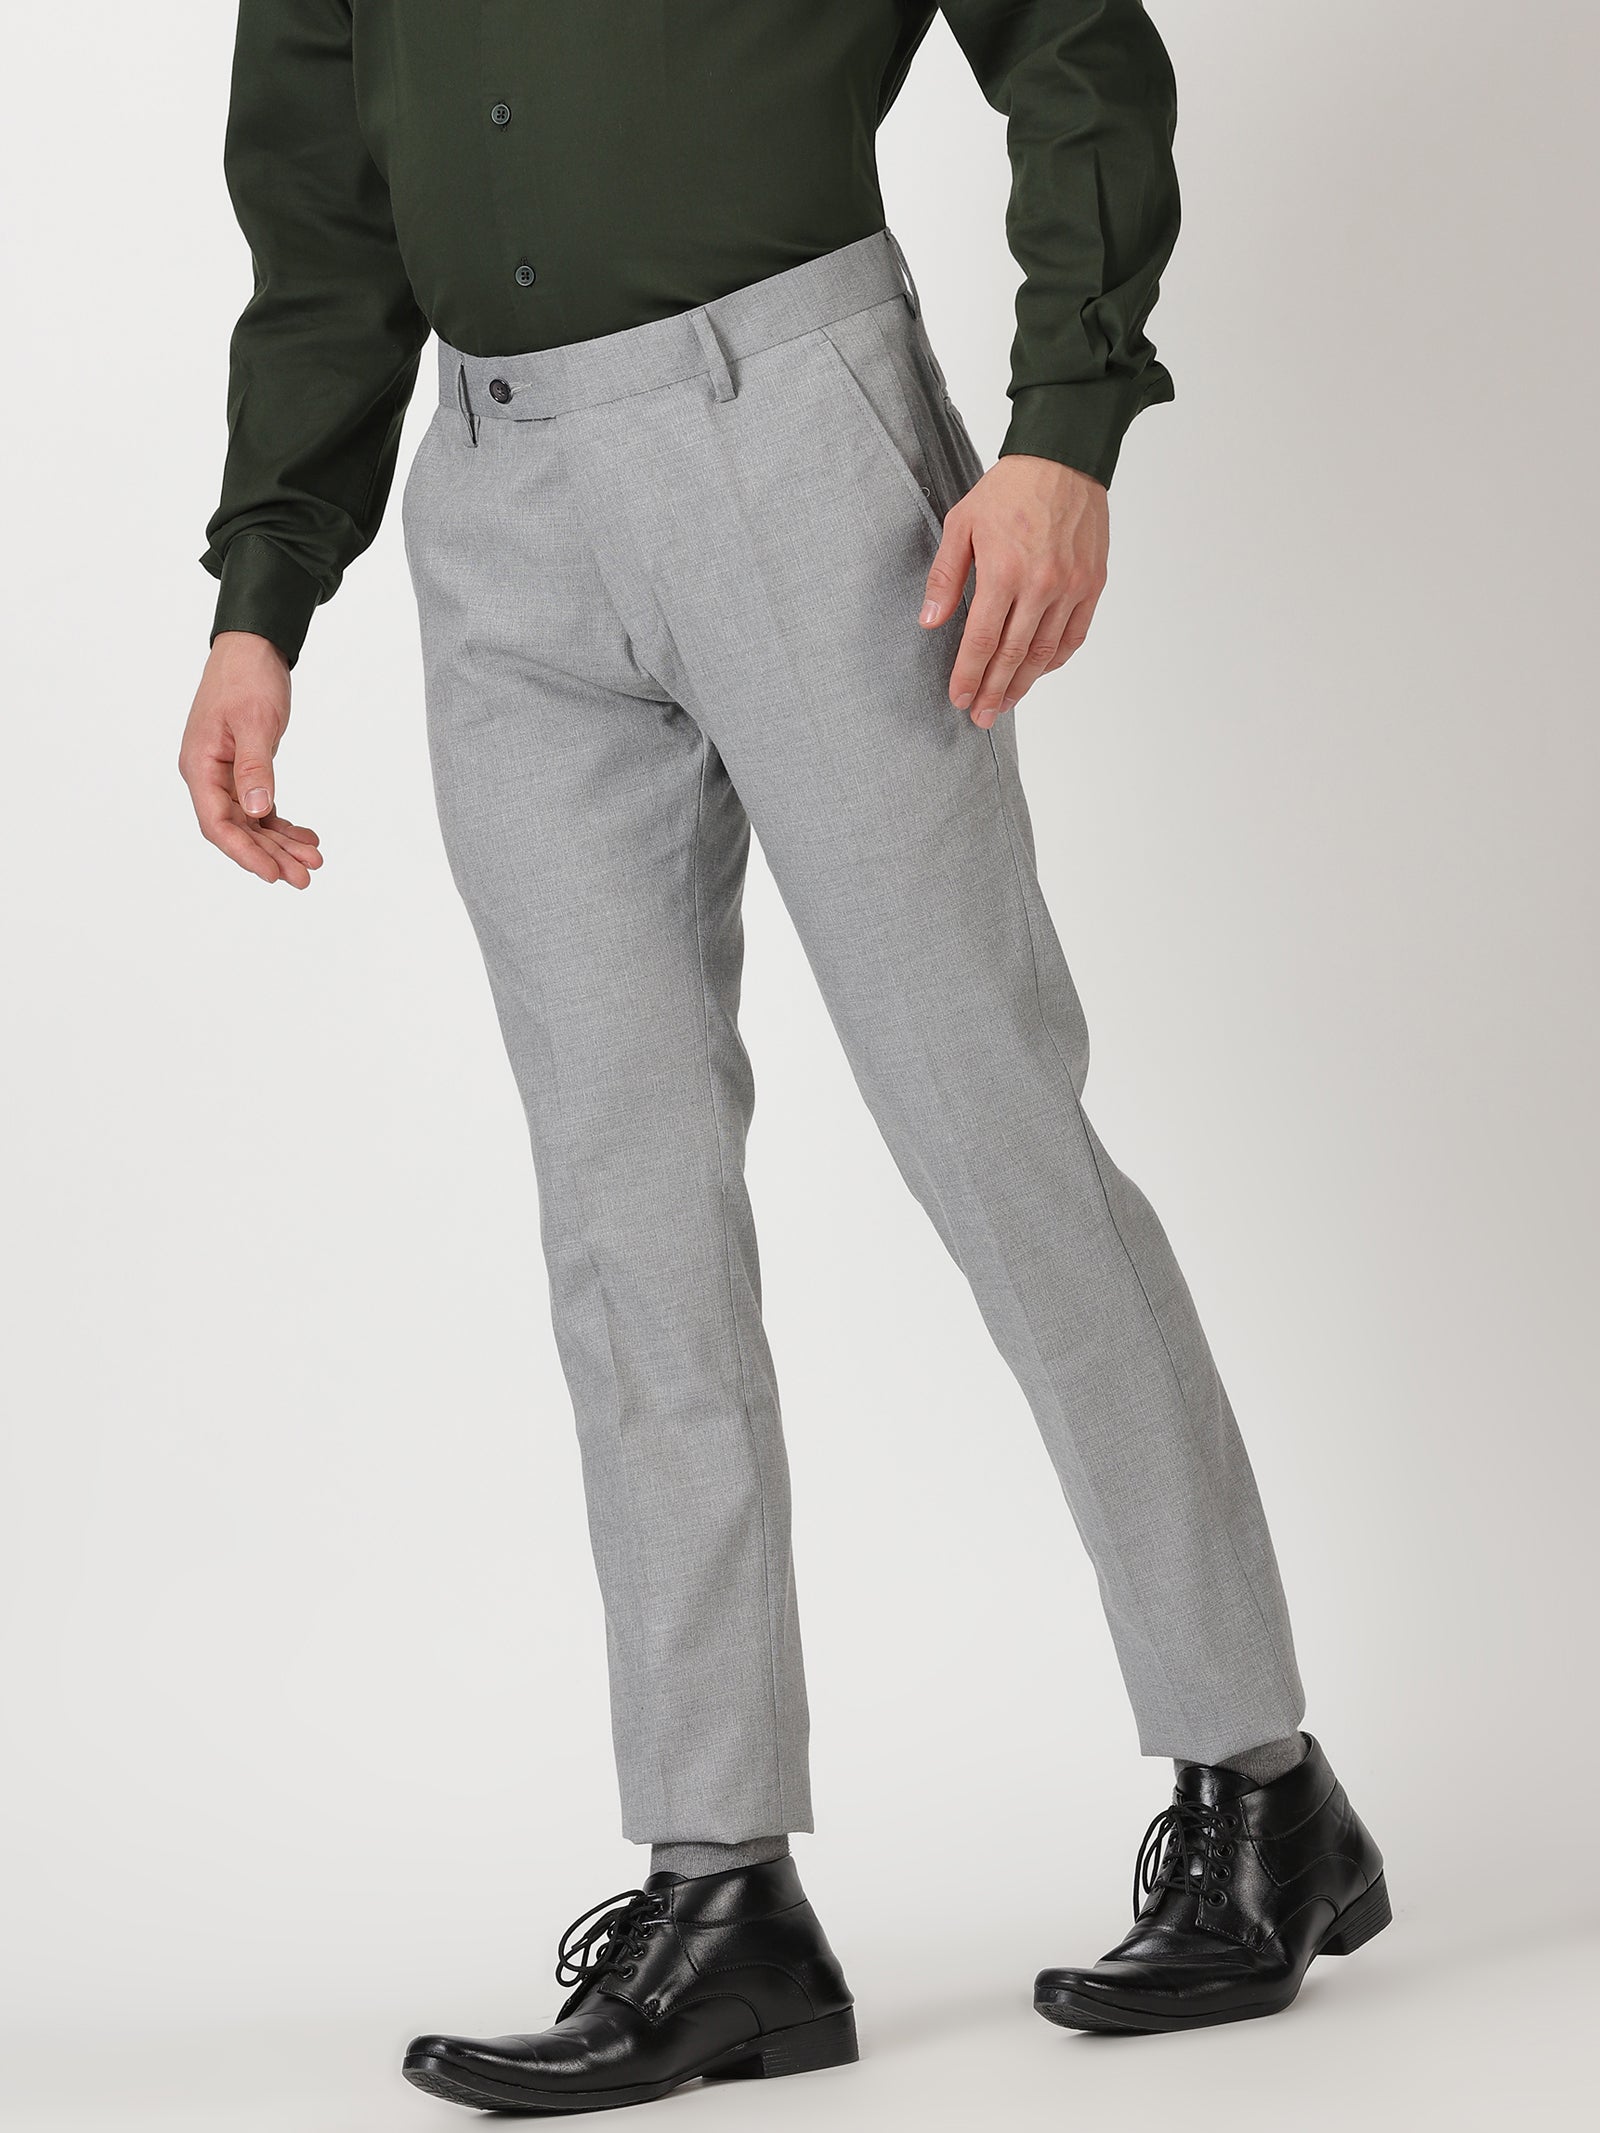 Oyster grey donegal tweed slim fit Trousers